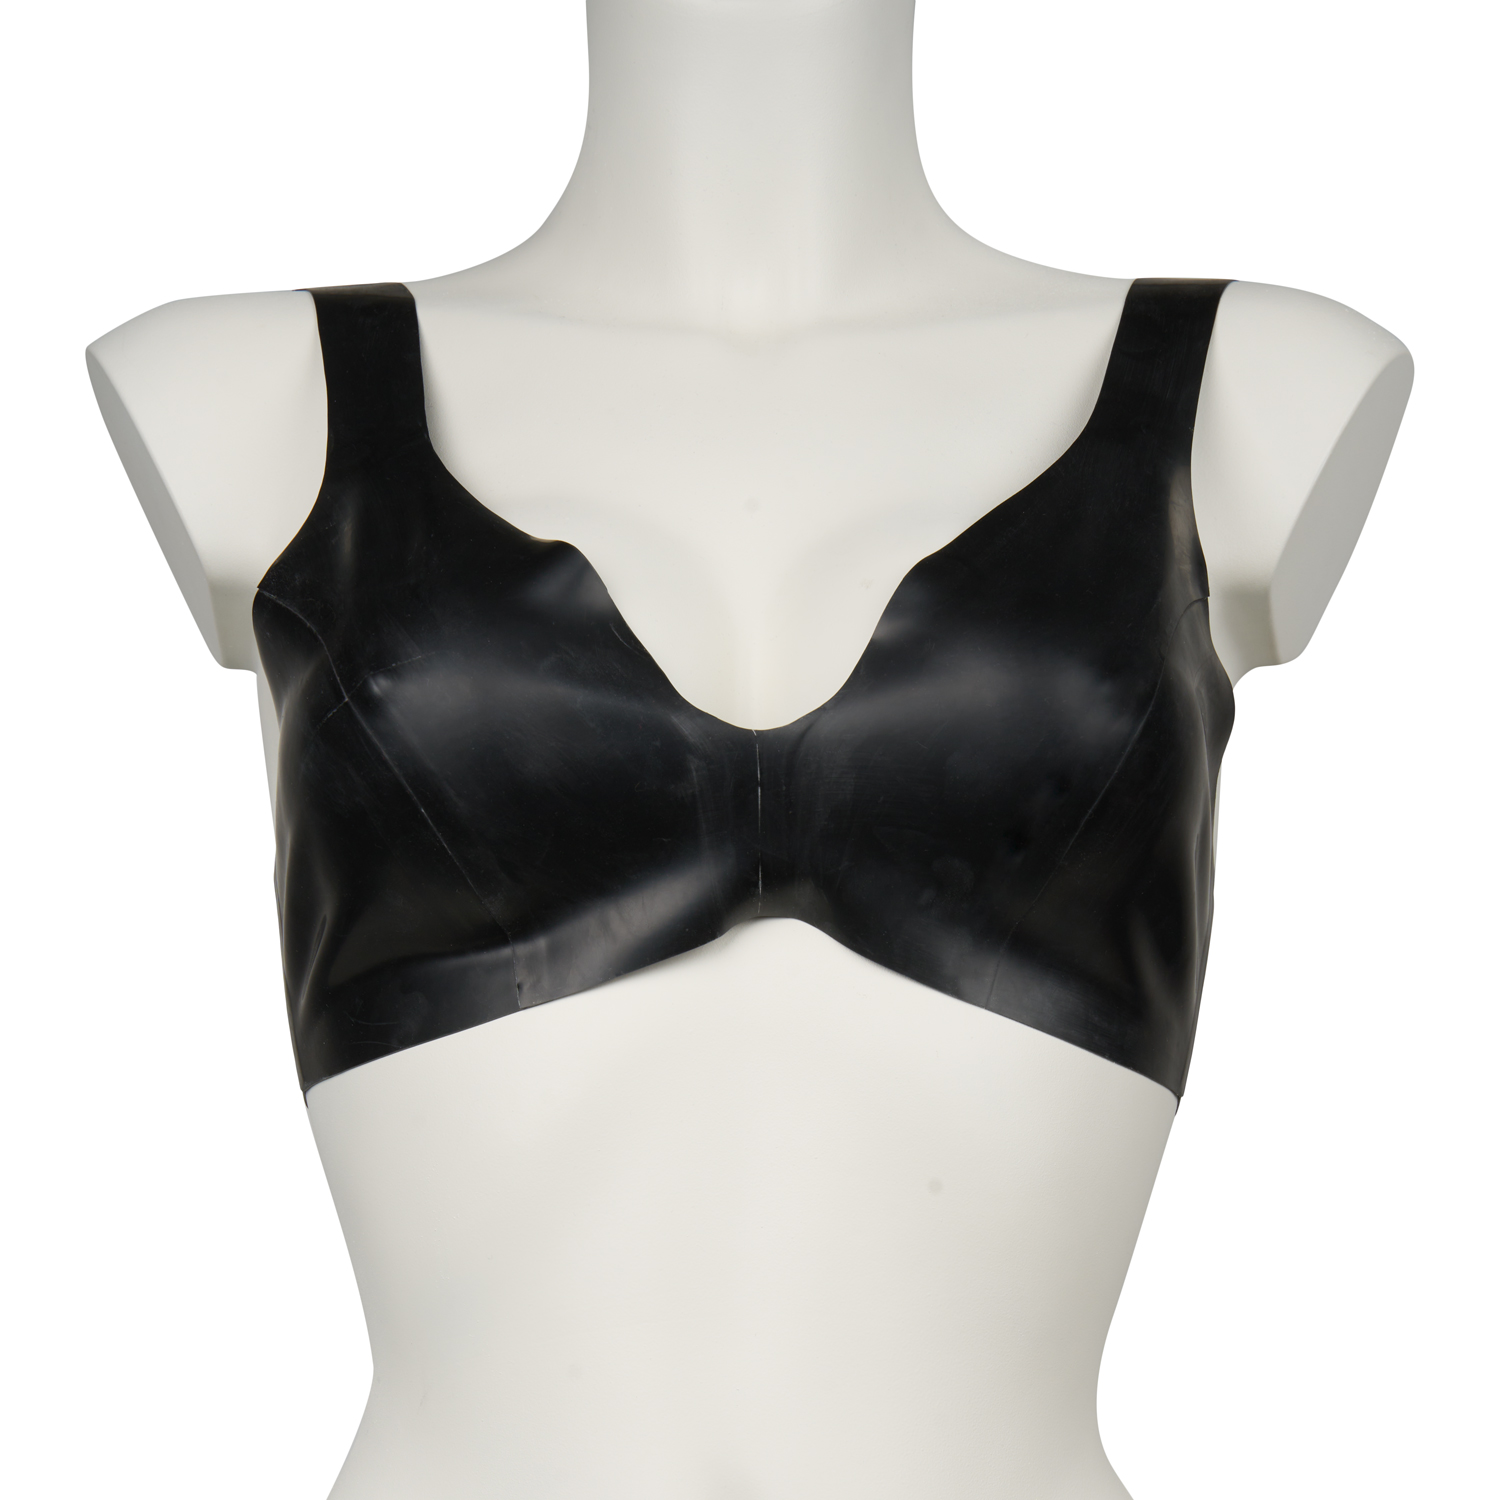 Late X Latex Bustier - XL